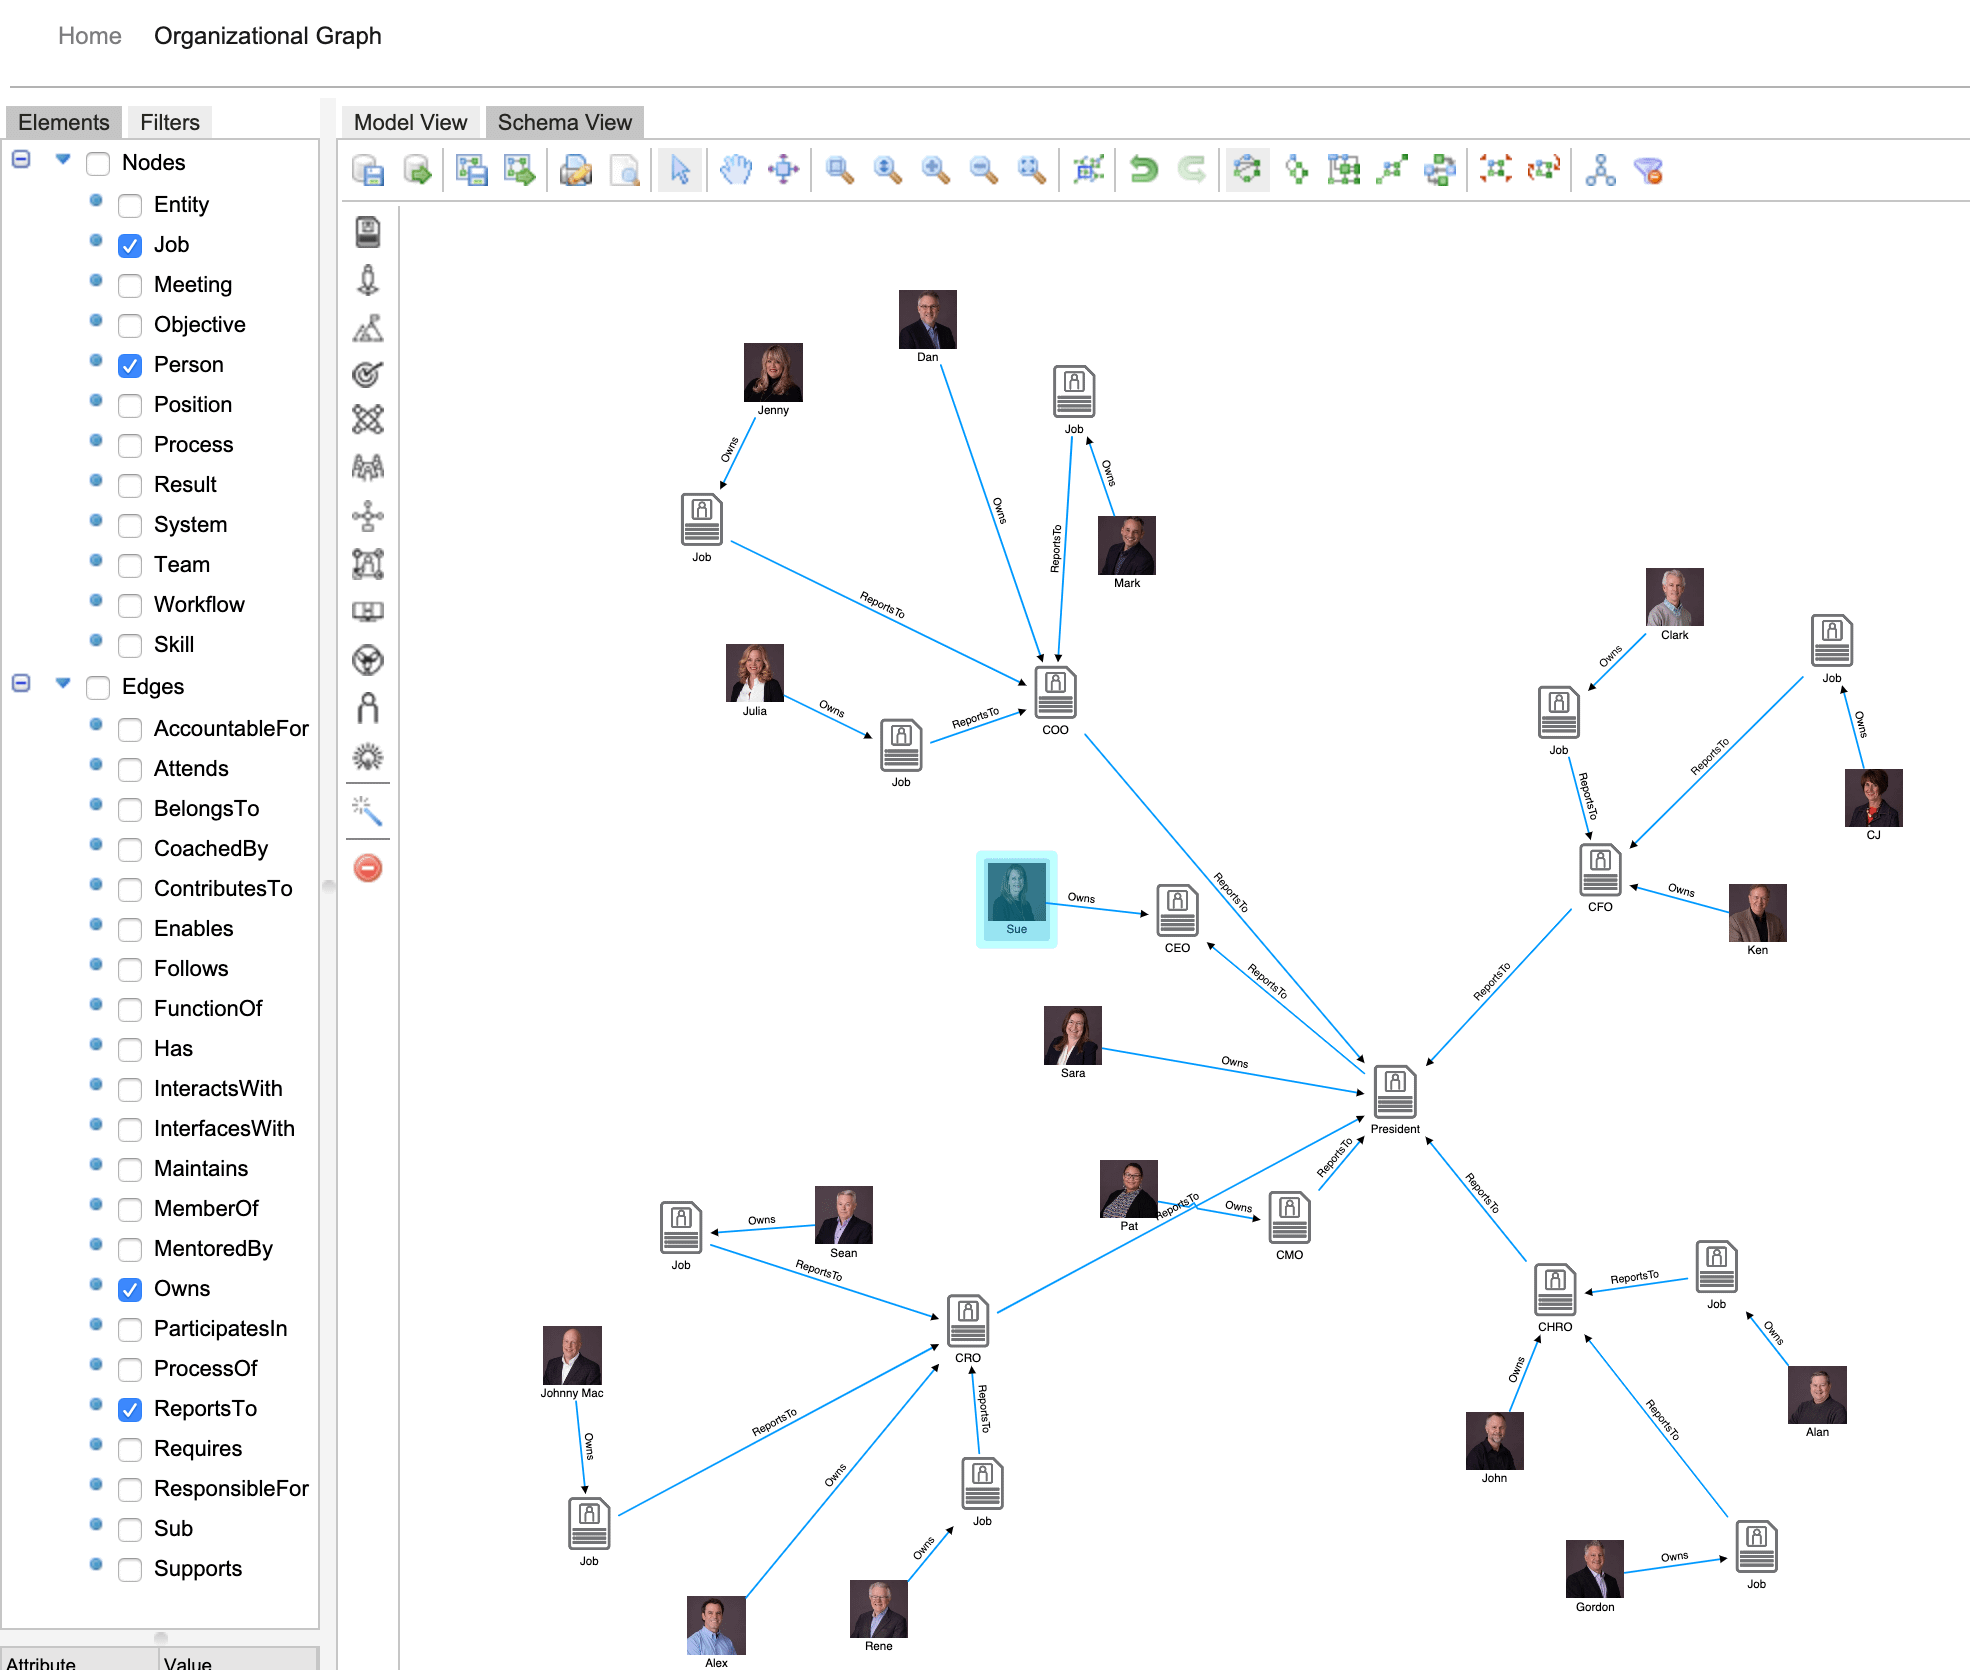 org graph software screenshot showing symmetrical layout unlike what an org chart can do more like a 3D org chart"